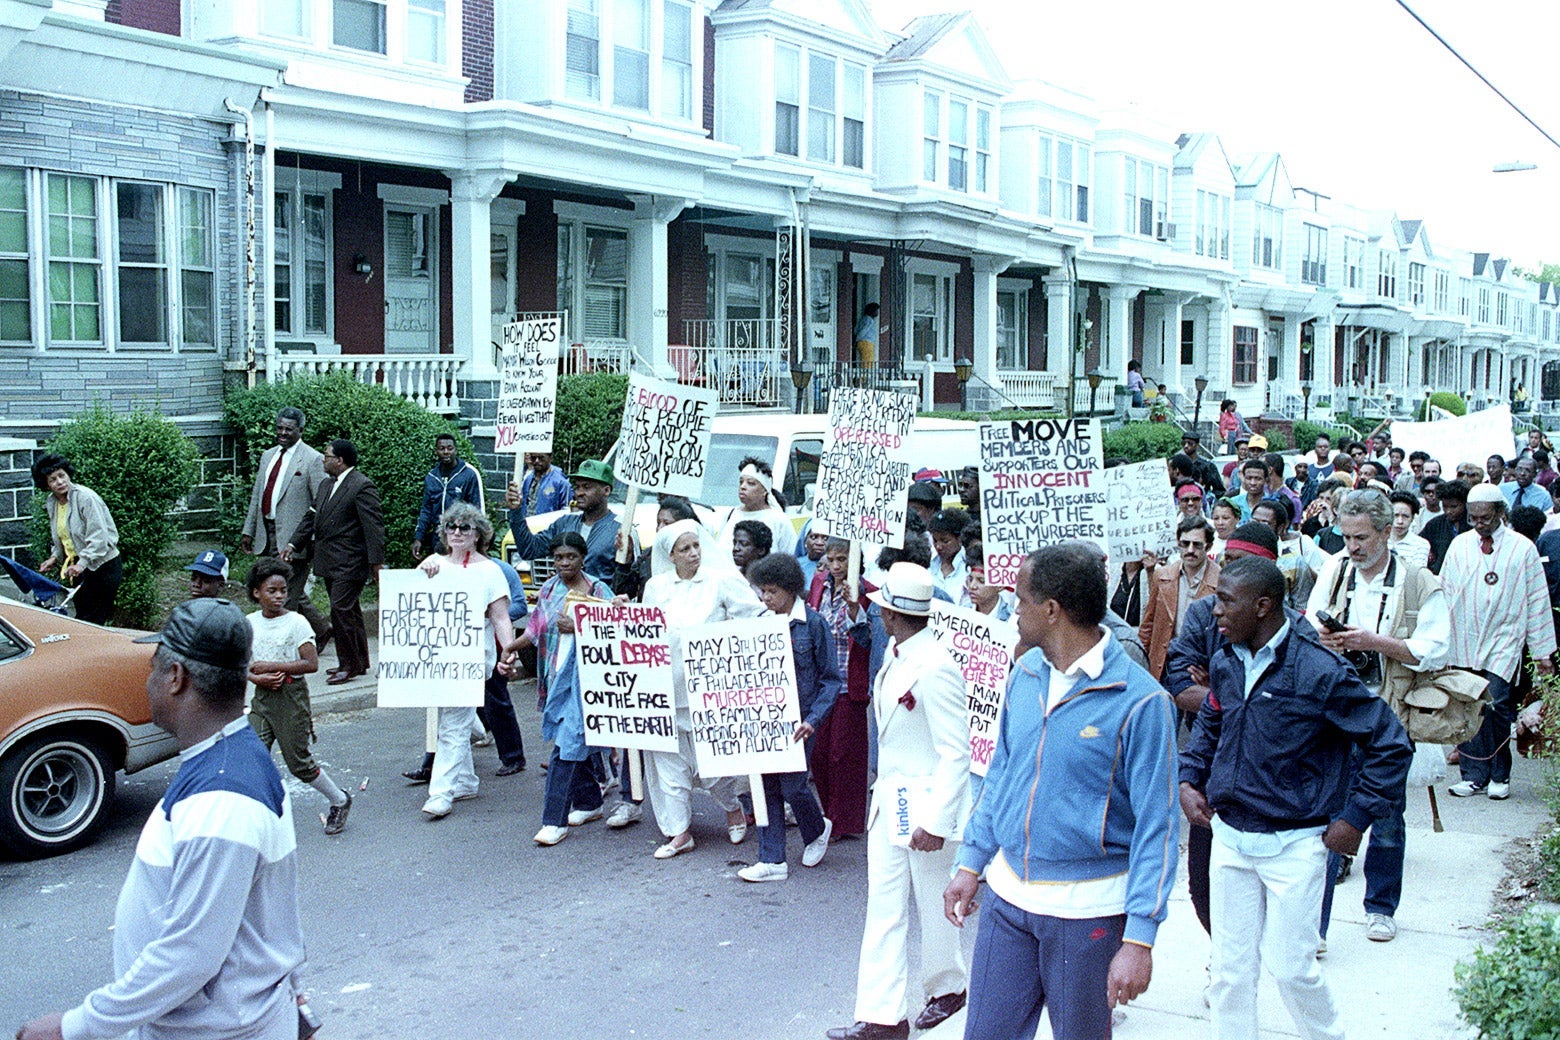 People march in the road past row houses holding signs in support of MOVE